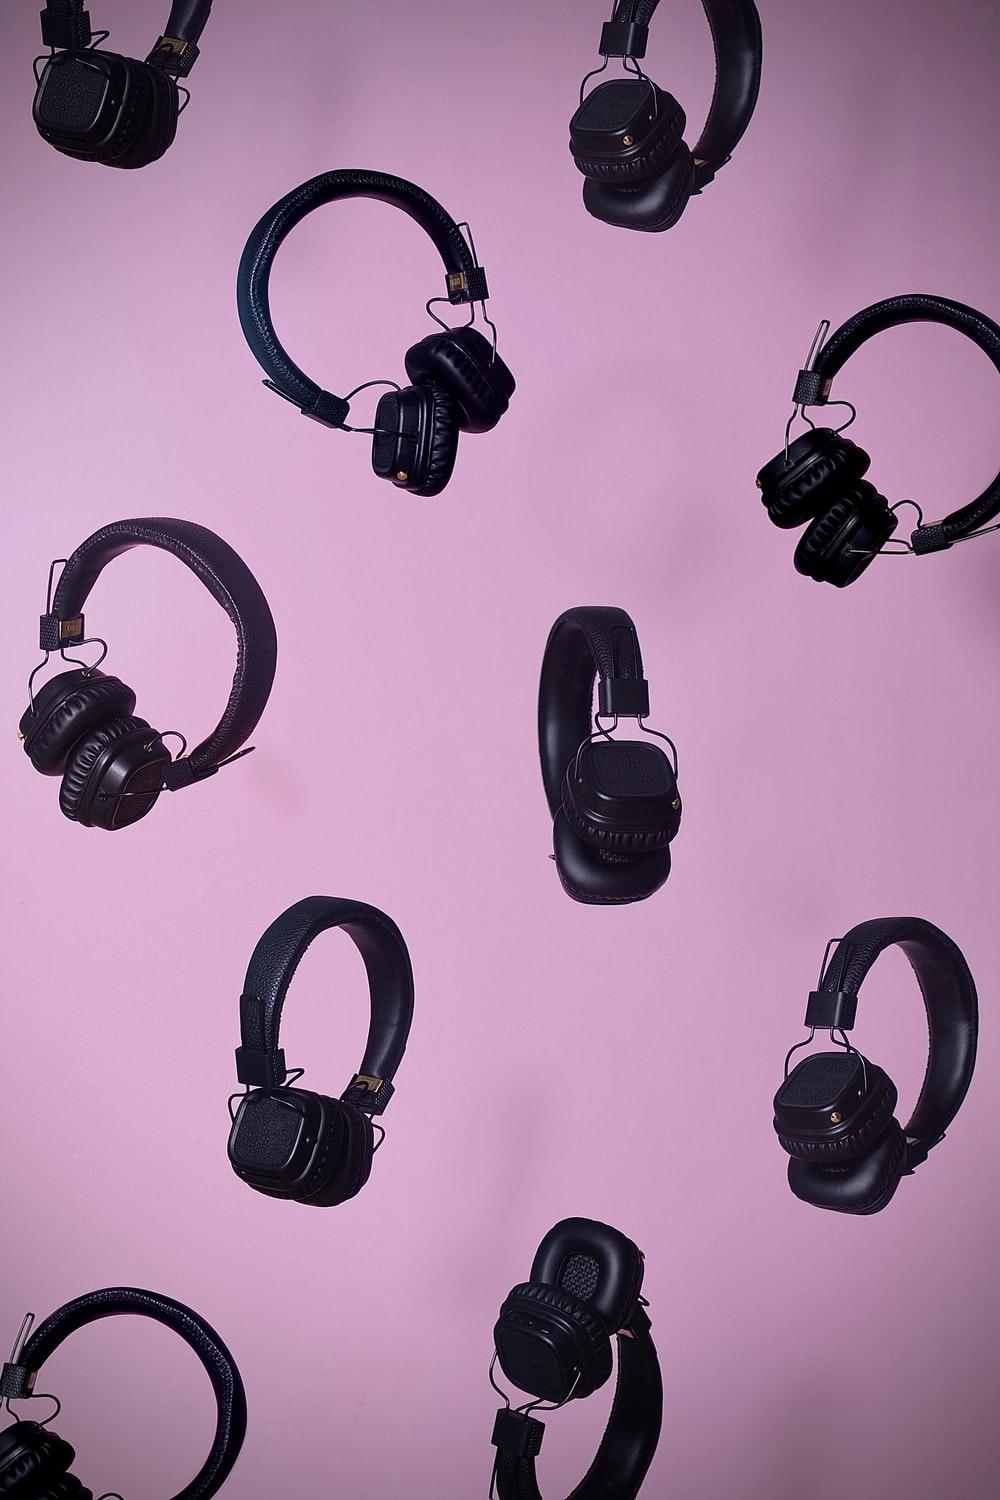 Headphones Picture. Download Free Image